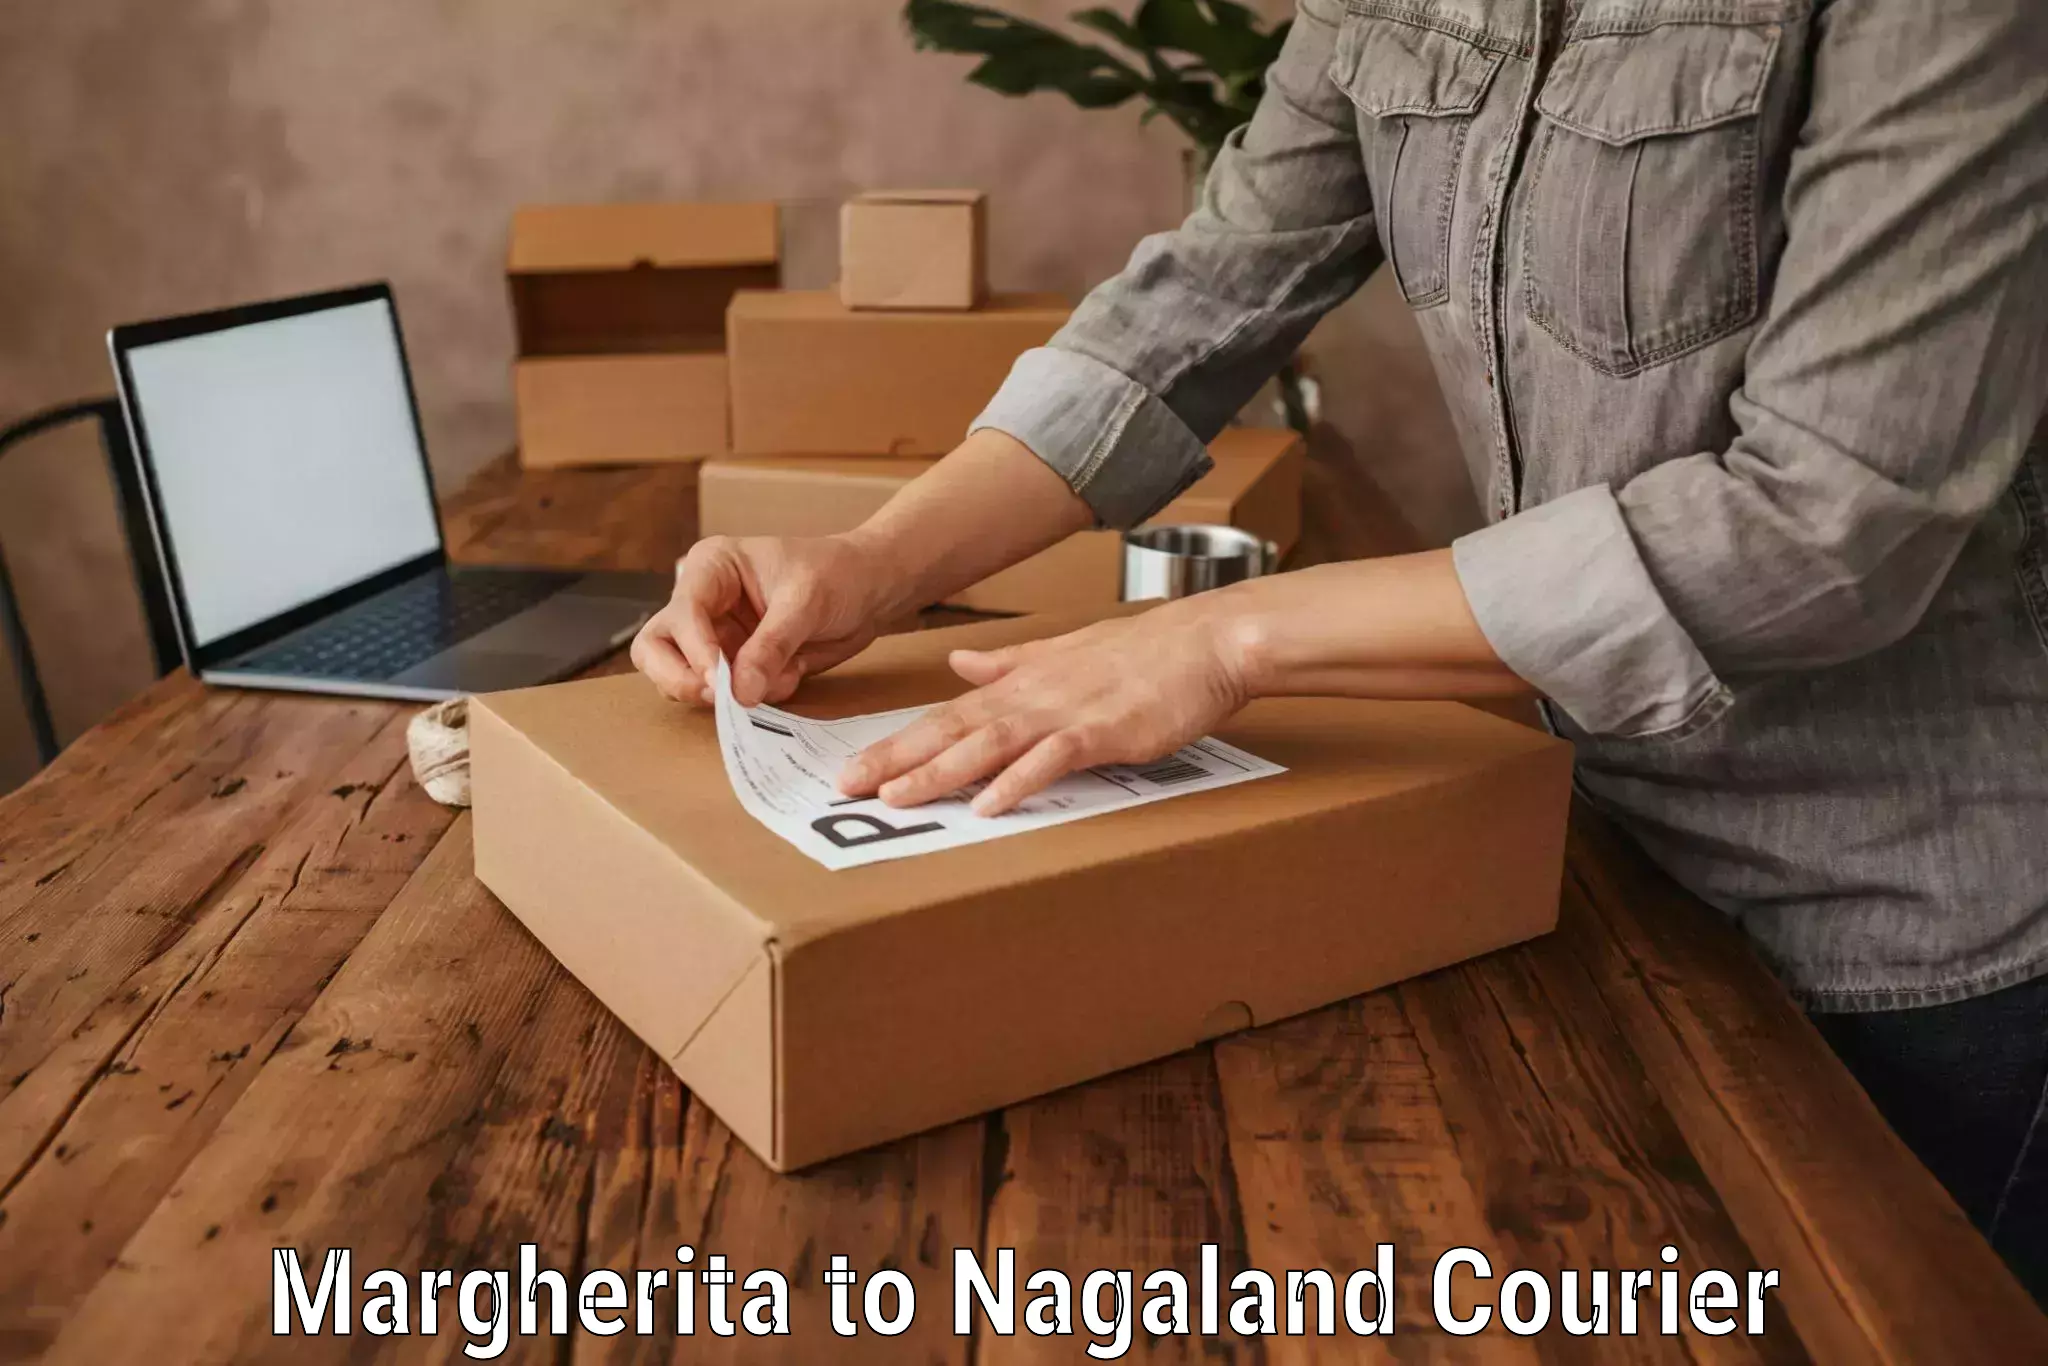 Luggage transport consultancy Margherita to Nagaland